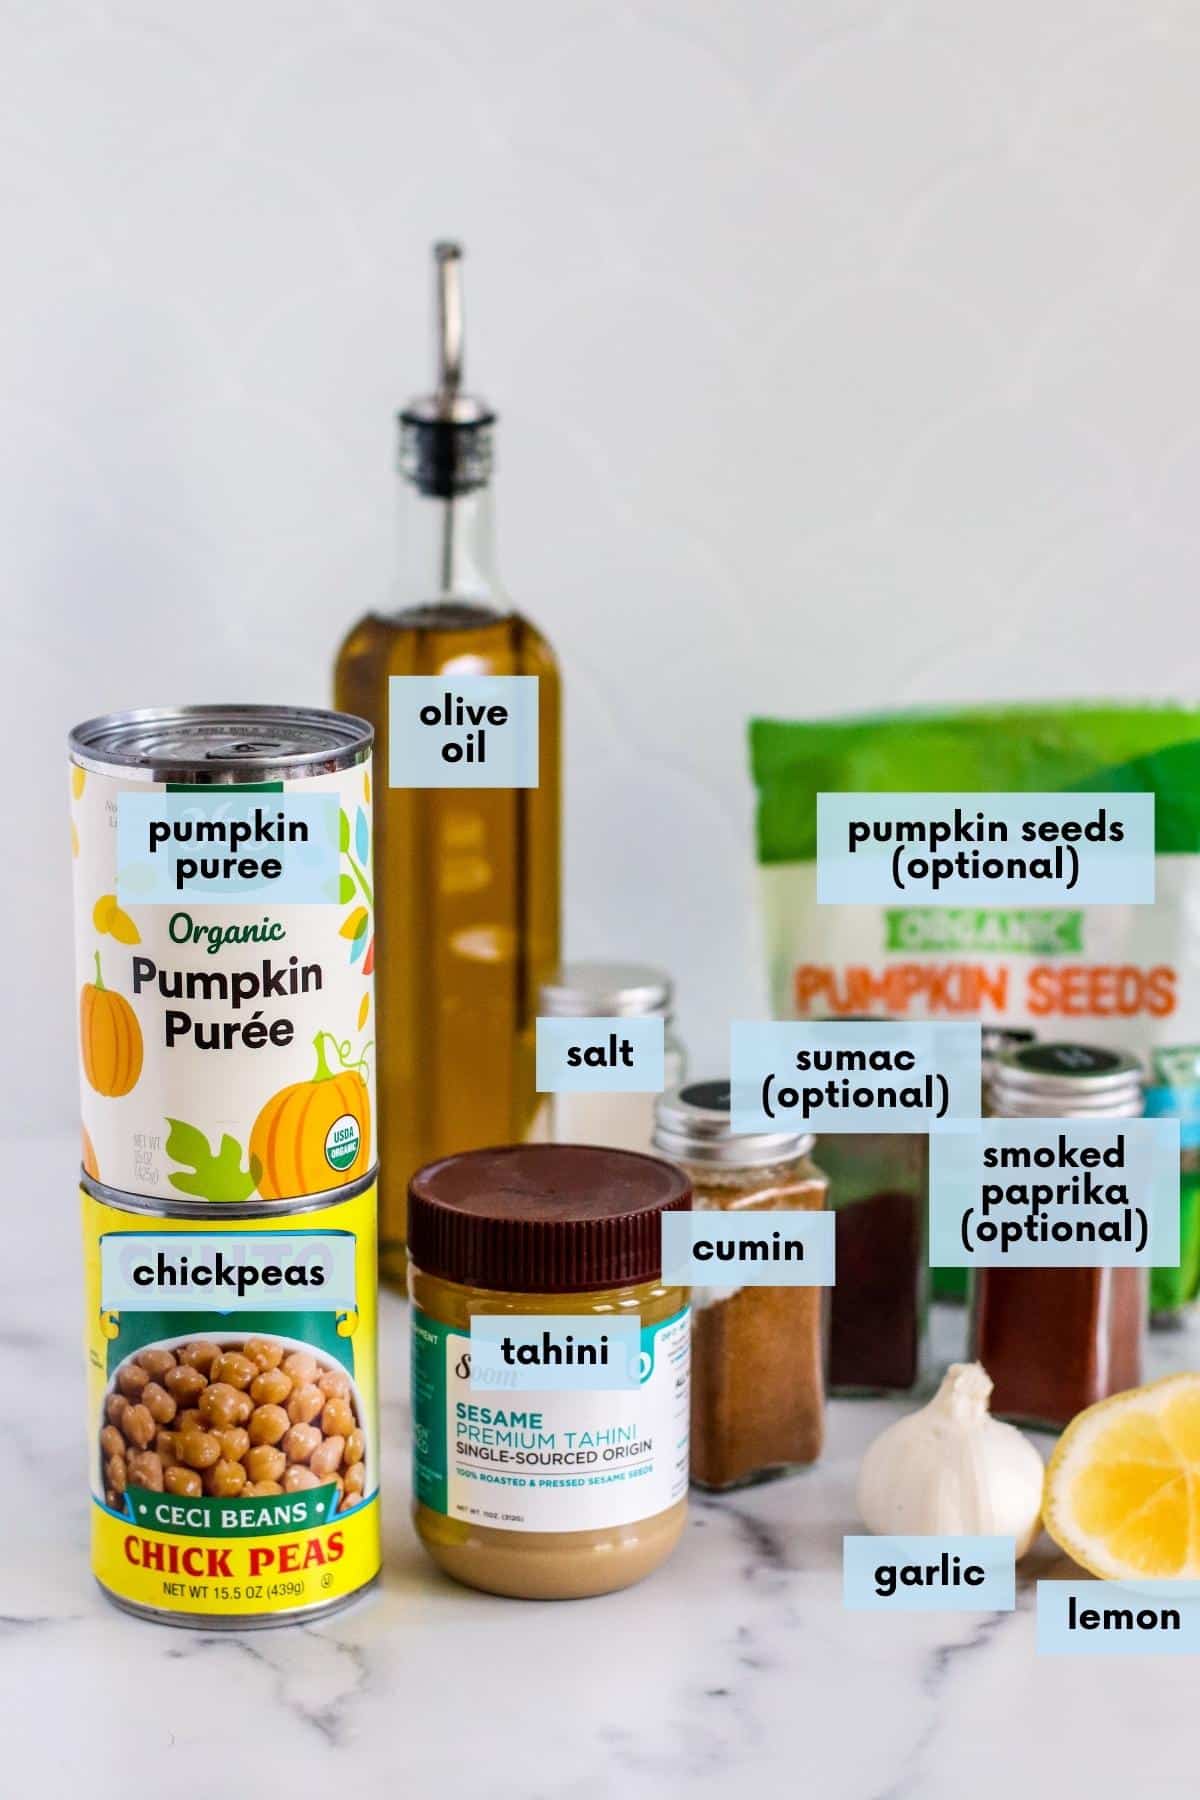 Labeled ingredients needed to make this recipe: Canned pumpkin puree, canned chickpeas, olive oil, hummus, salt, ground cumin, garlic, and lemon and optional ingredients, pumpkin seeds (pepitas), ground sumac, and smoked paprika.